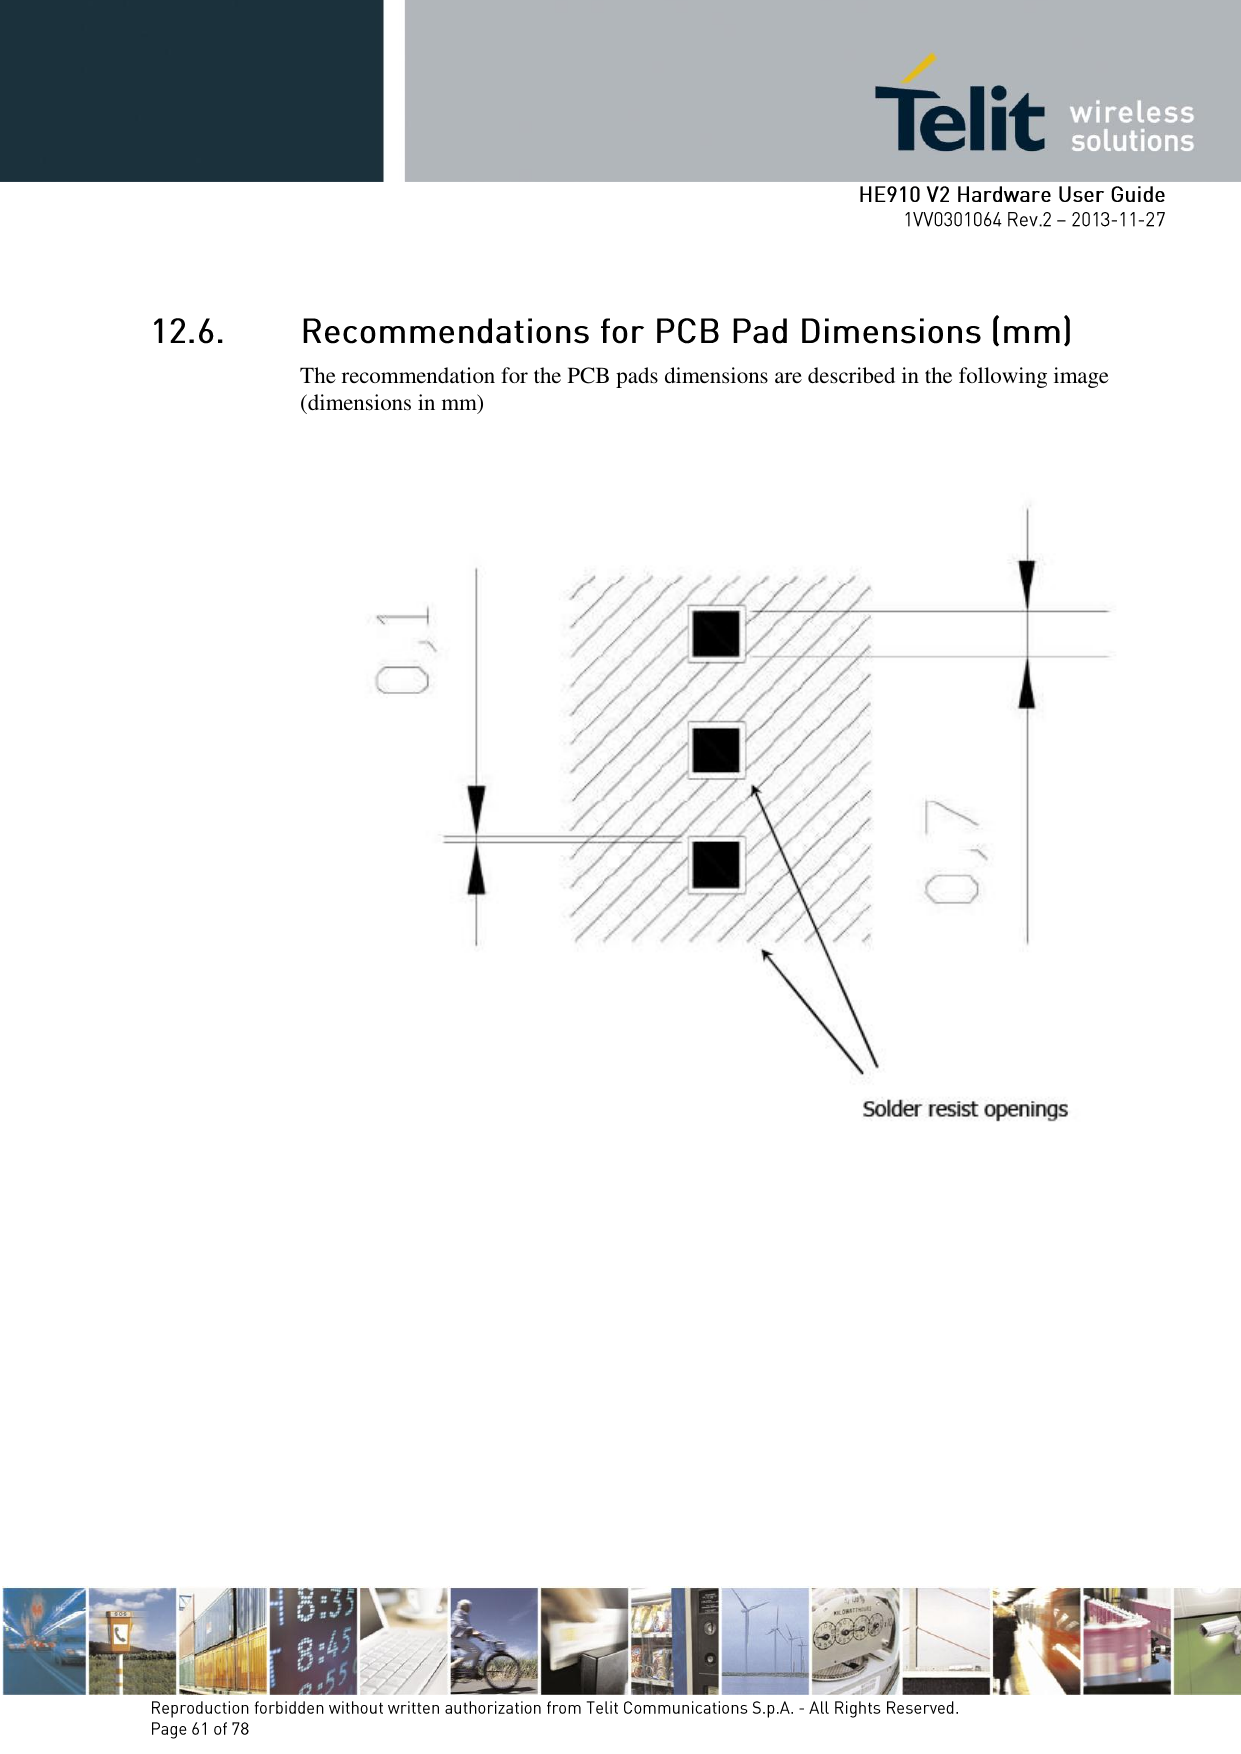        The recommendation for the PCB pads dimensions are described in the following image (dimensions in mm) 